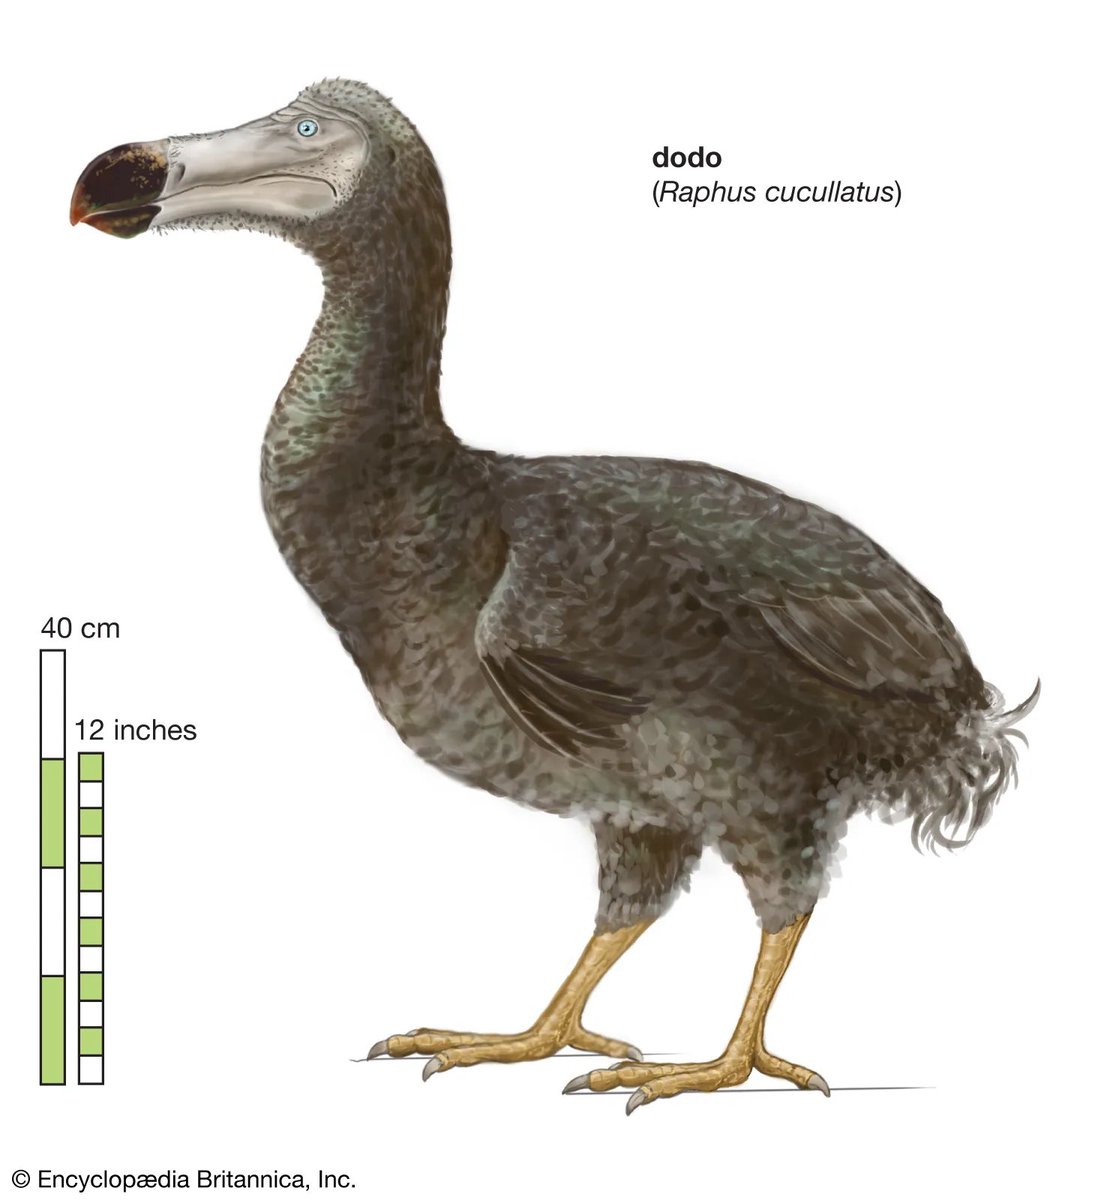 Another possible future is the Dodo. global temperatures rise and we reach irreversible tipping points world incompatible with human civilisation and heading to extinction. This scenario is already on the cards as tipping points are already being activated.